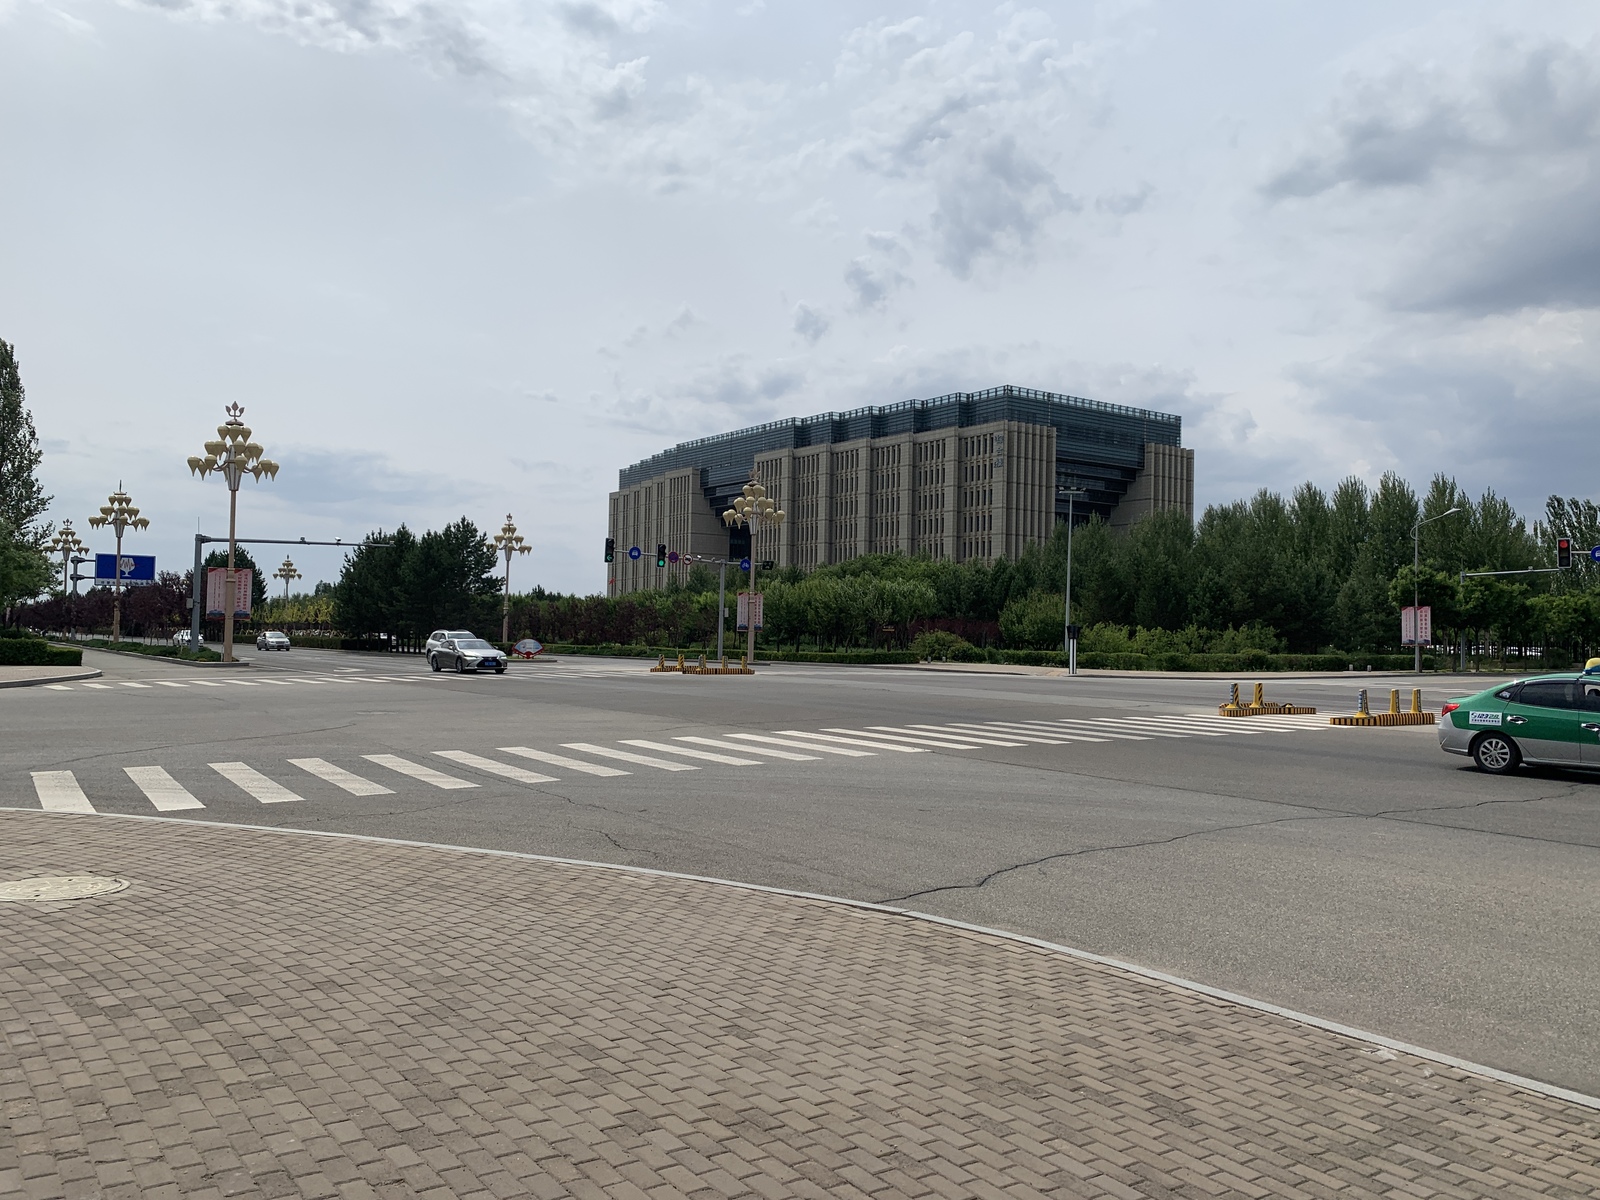 Ordos - a ghost town in China - My, China, Ordos, Deserted, Призрак, Why, Longpost